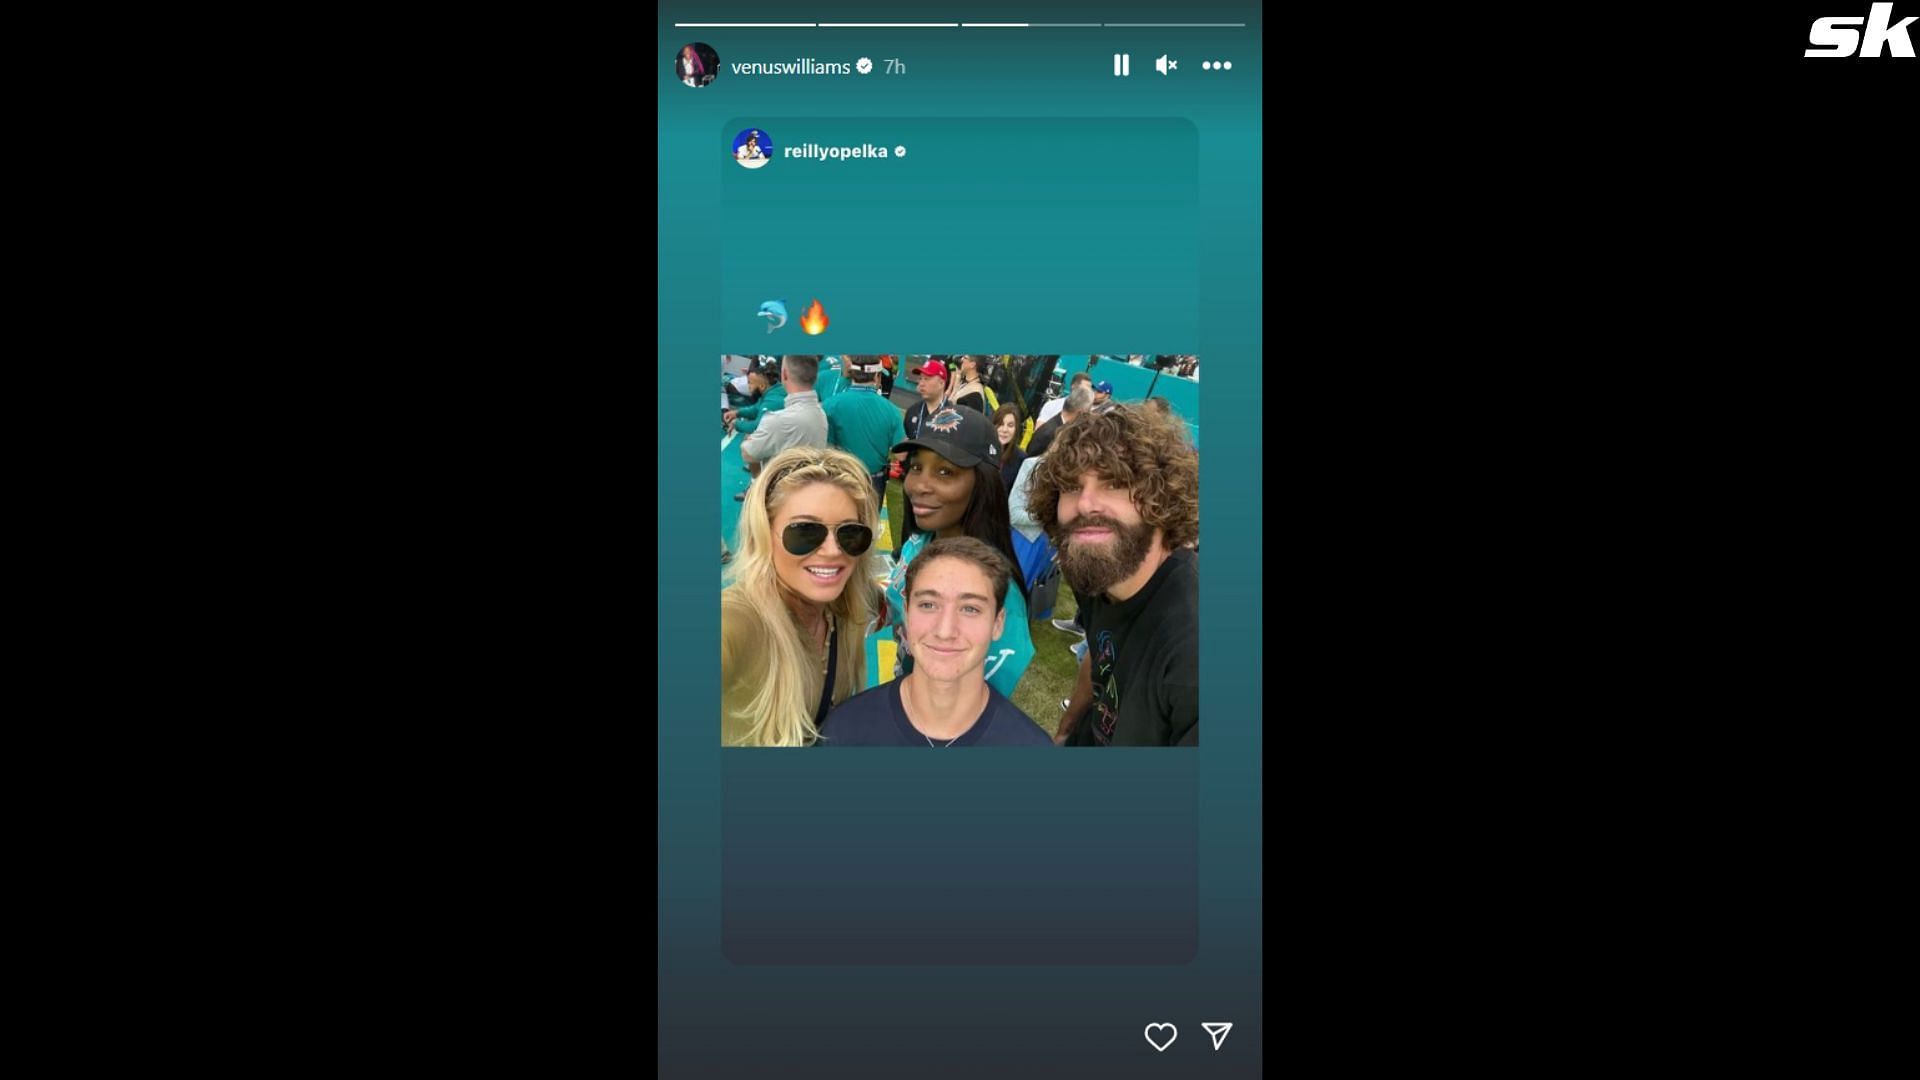 Tennis stars Venus Williams and Reilly Opelka in attendance amongst others at the Miami Dolphins game - @venuswilliams, Instagram